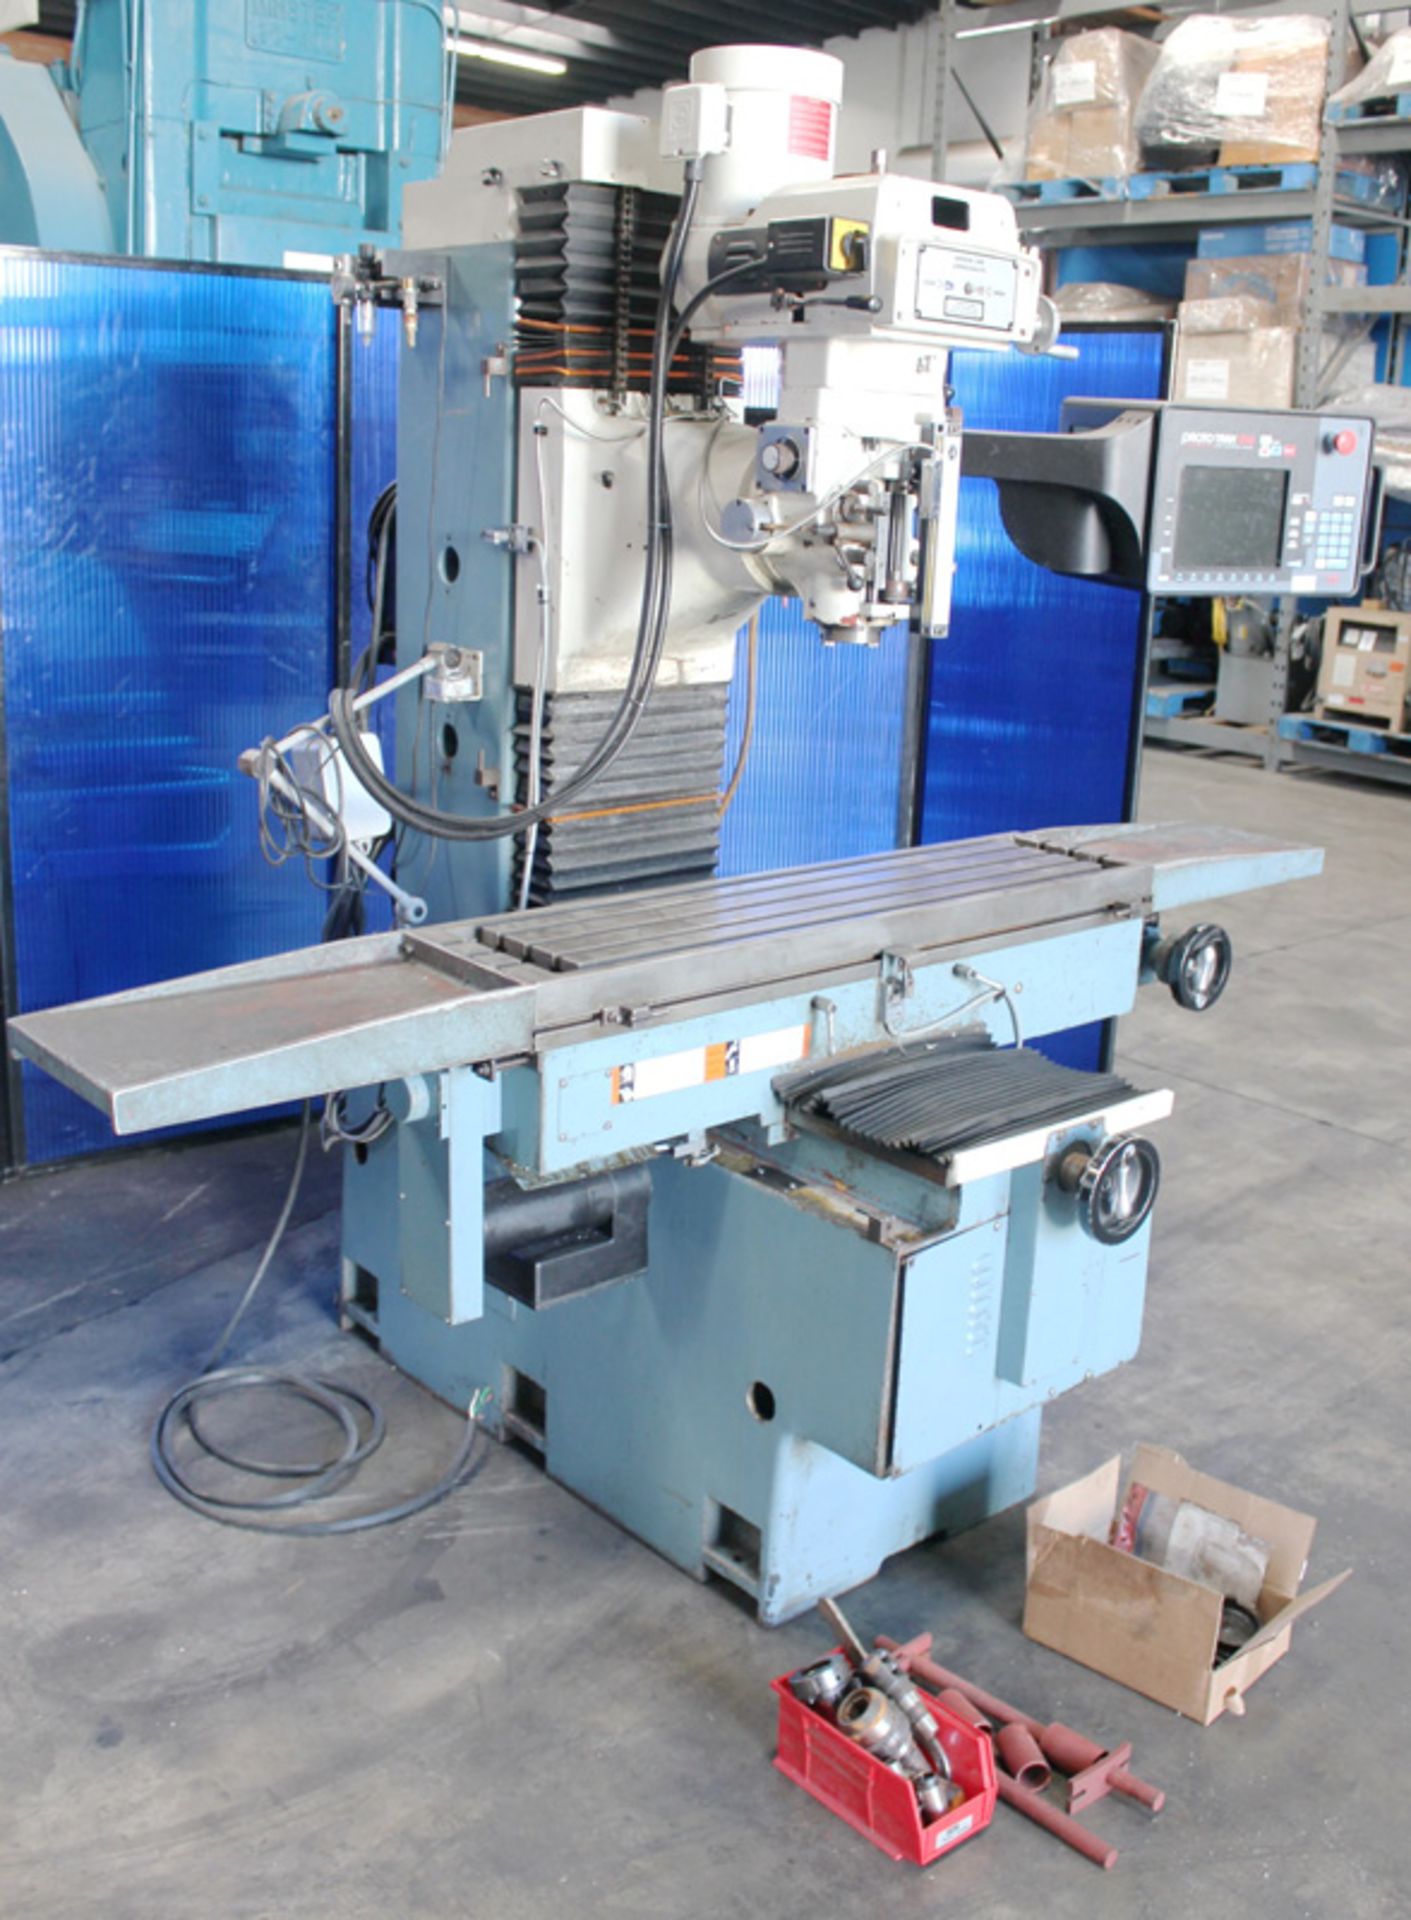 2002 Southwestern Trax CNC Vertical Bed Mill | 30" x 17" x 23.5", Located In: Huntington Park, - Image 7 of 21